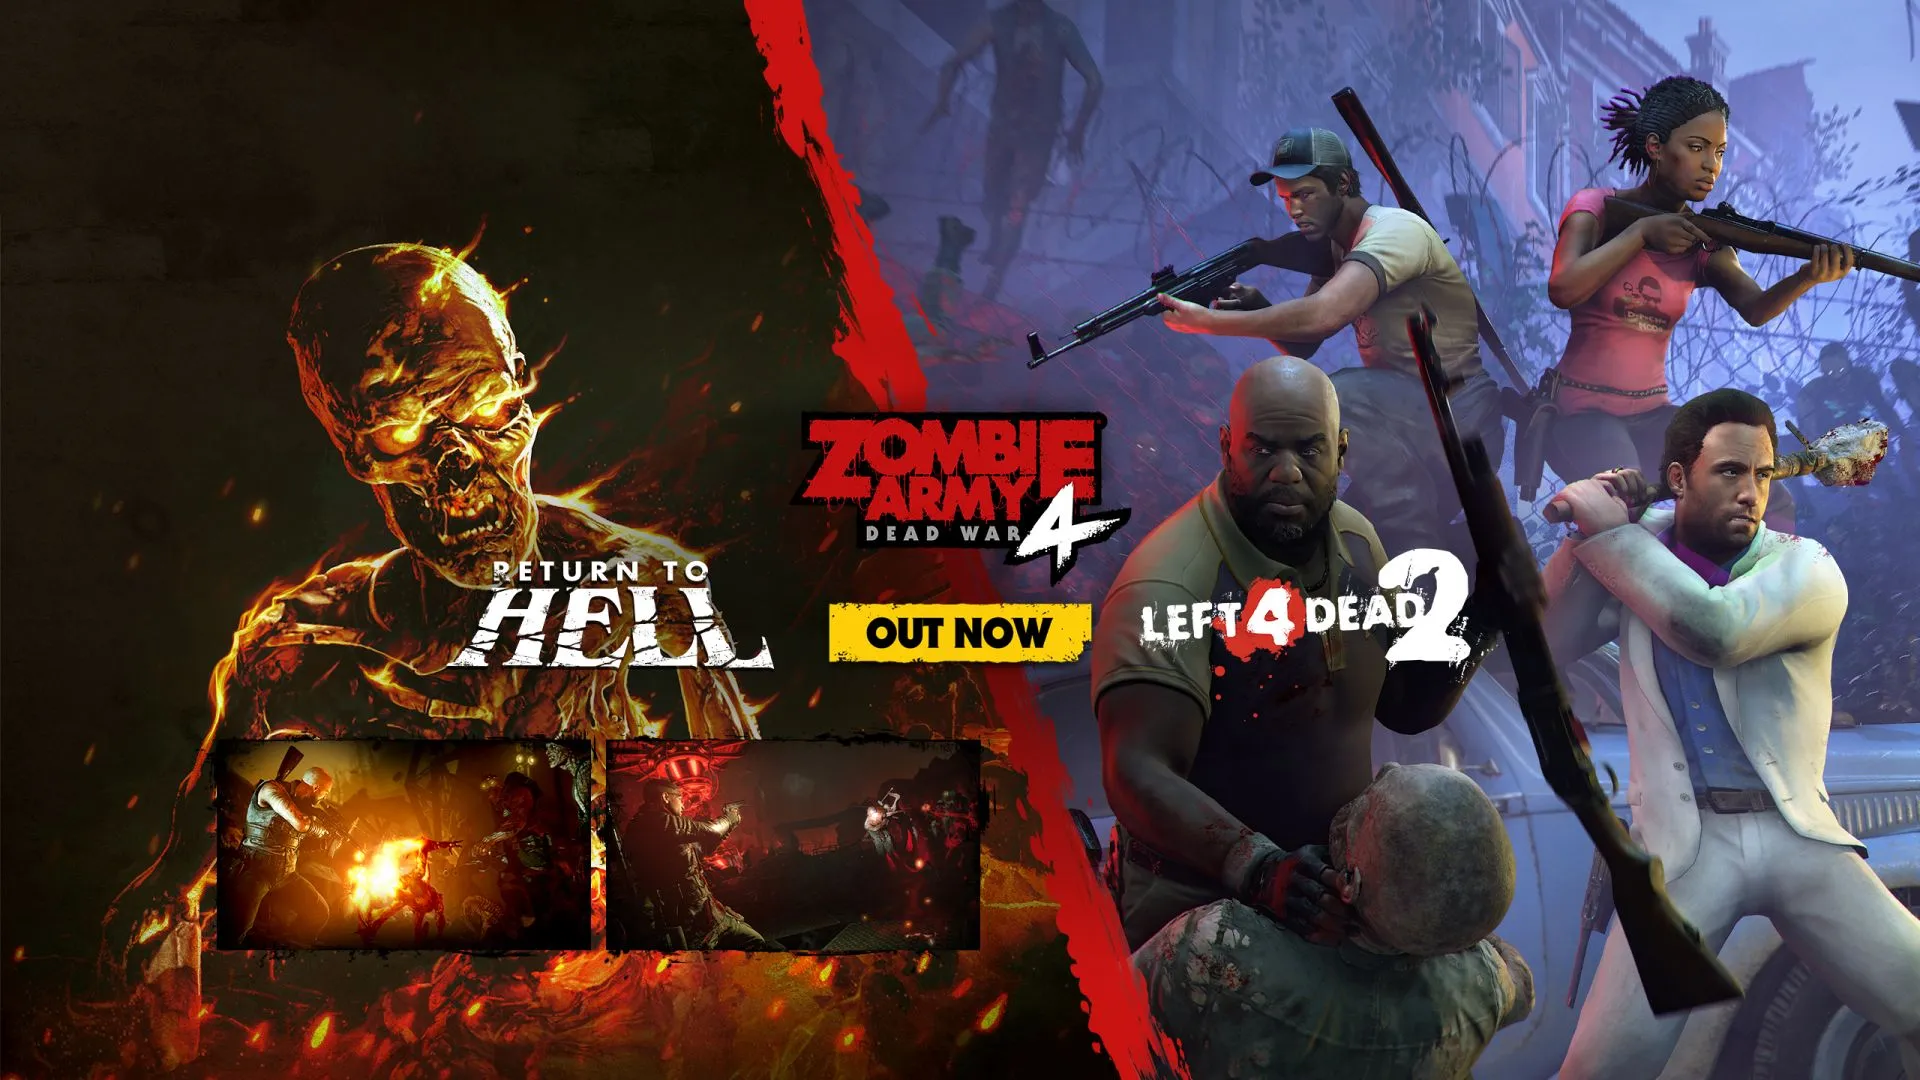 LEFT 4 DEAD 2 ICONS GET READY TO ‘RETURN TO HELL’ IN LATEST ZOMBIE ARMY 4 DLC